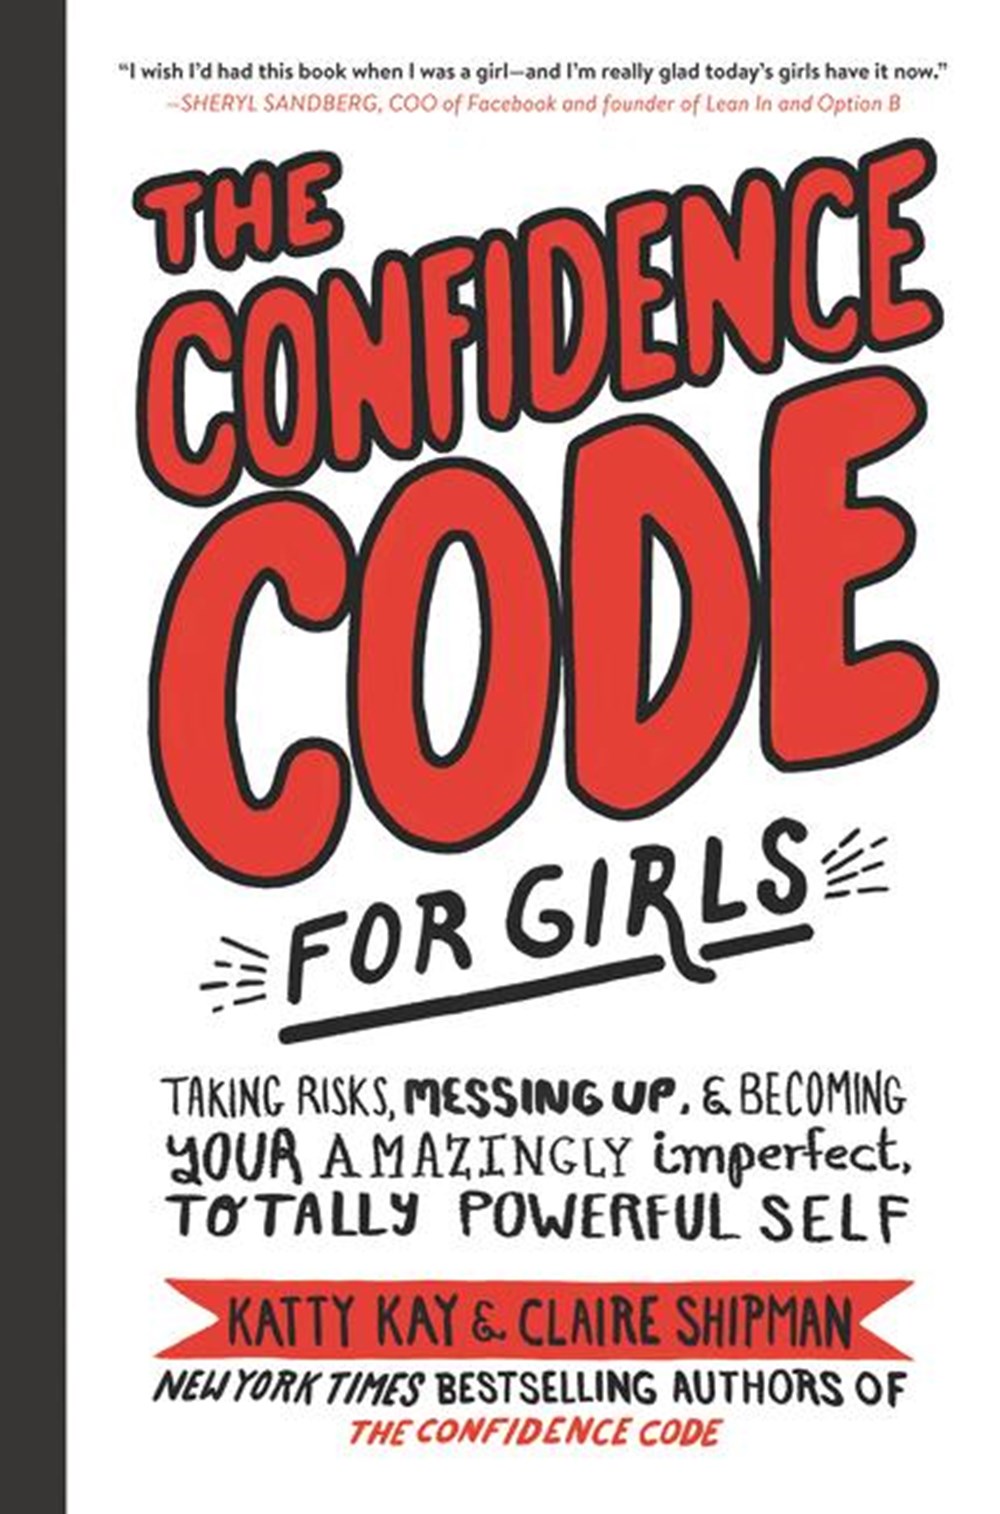 Confidence Code for Girls: Taking Risks, Messing Up, & Becoming Your Amazingly Imperfect, Totally Po